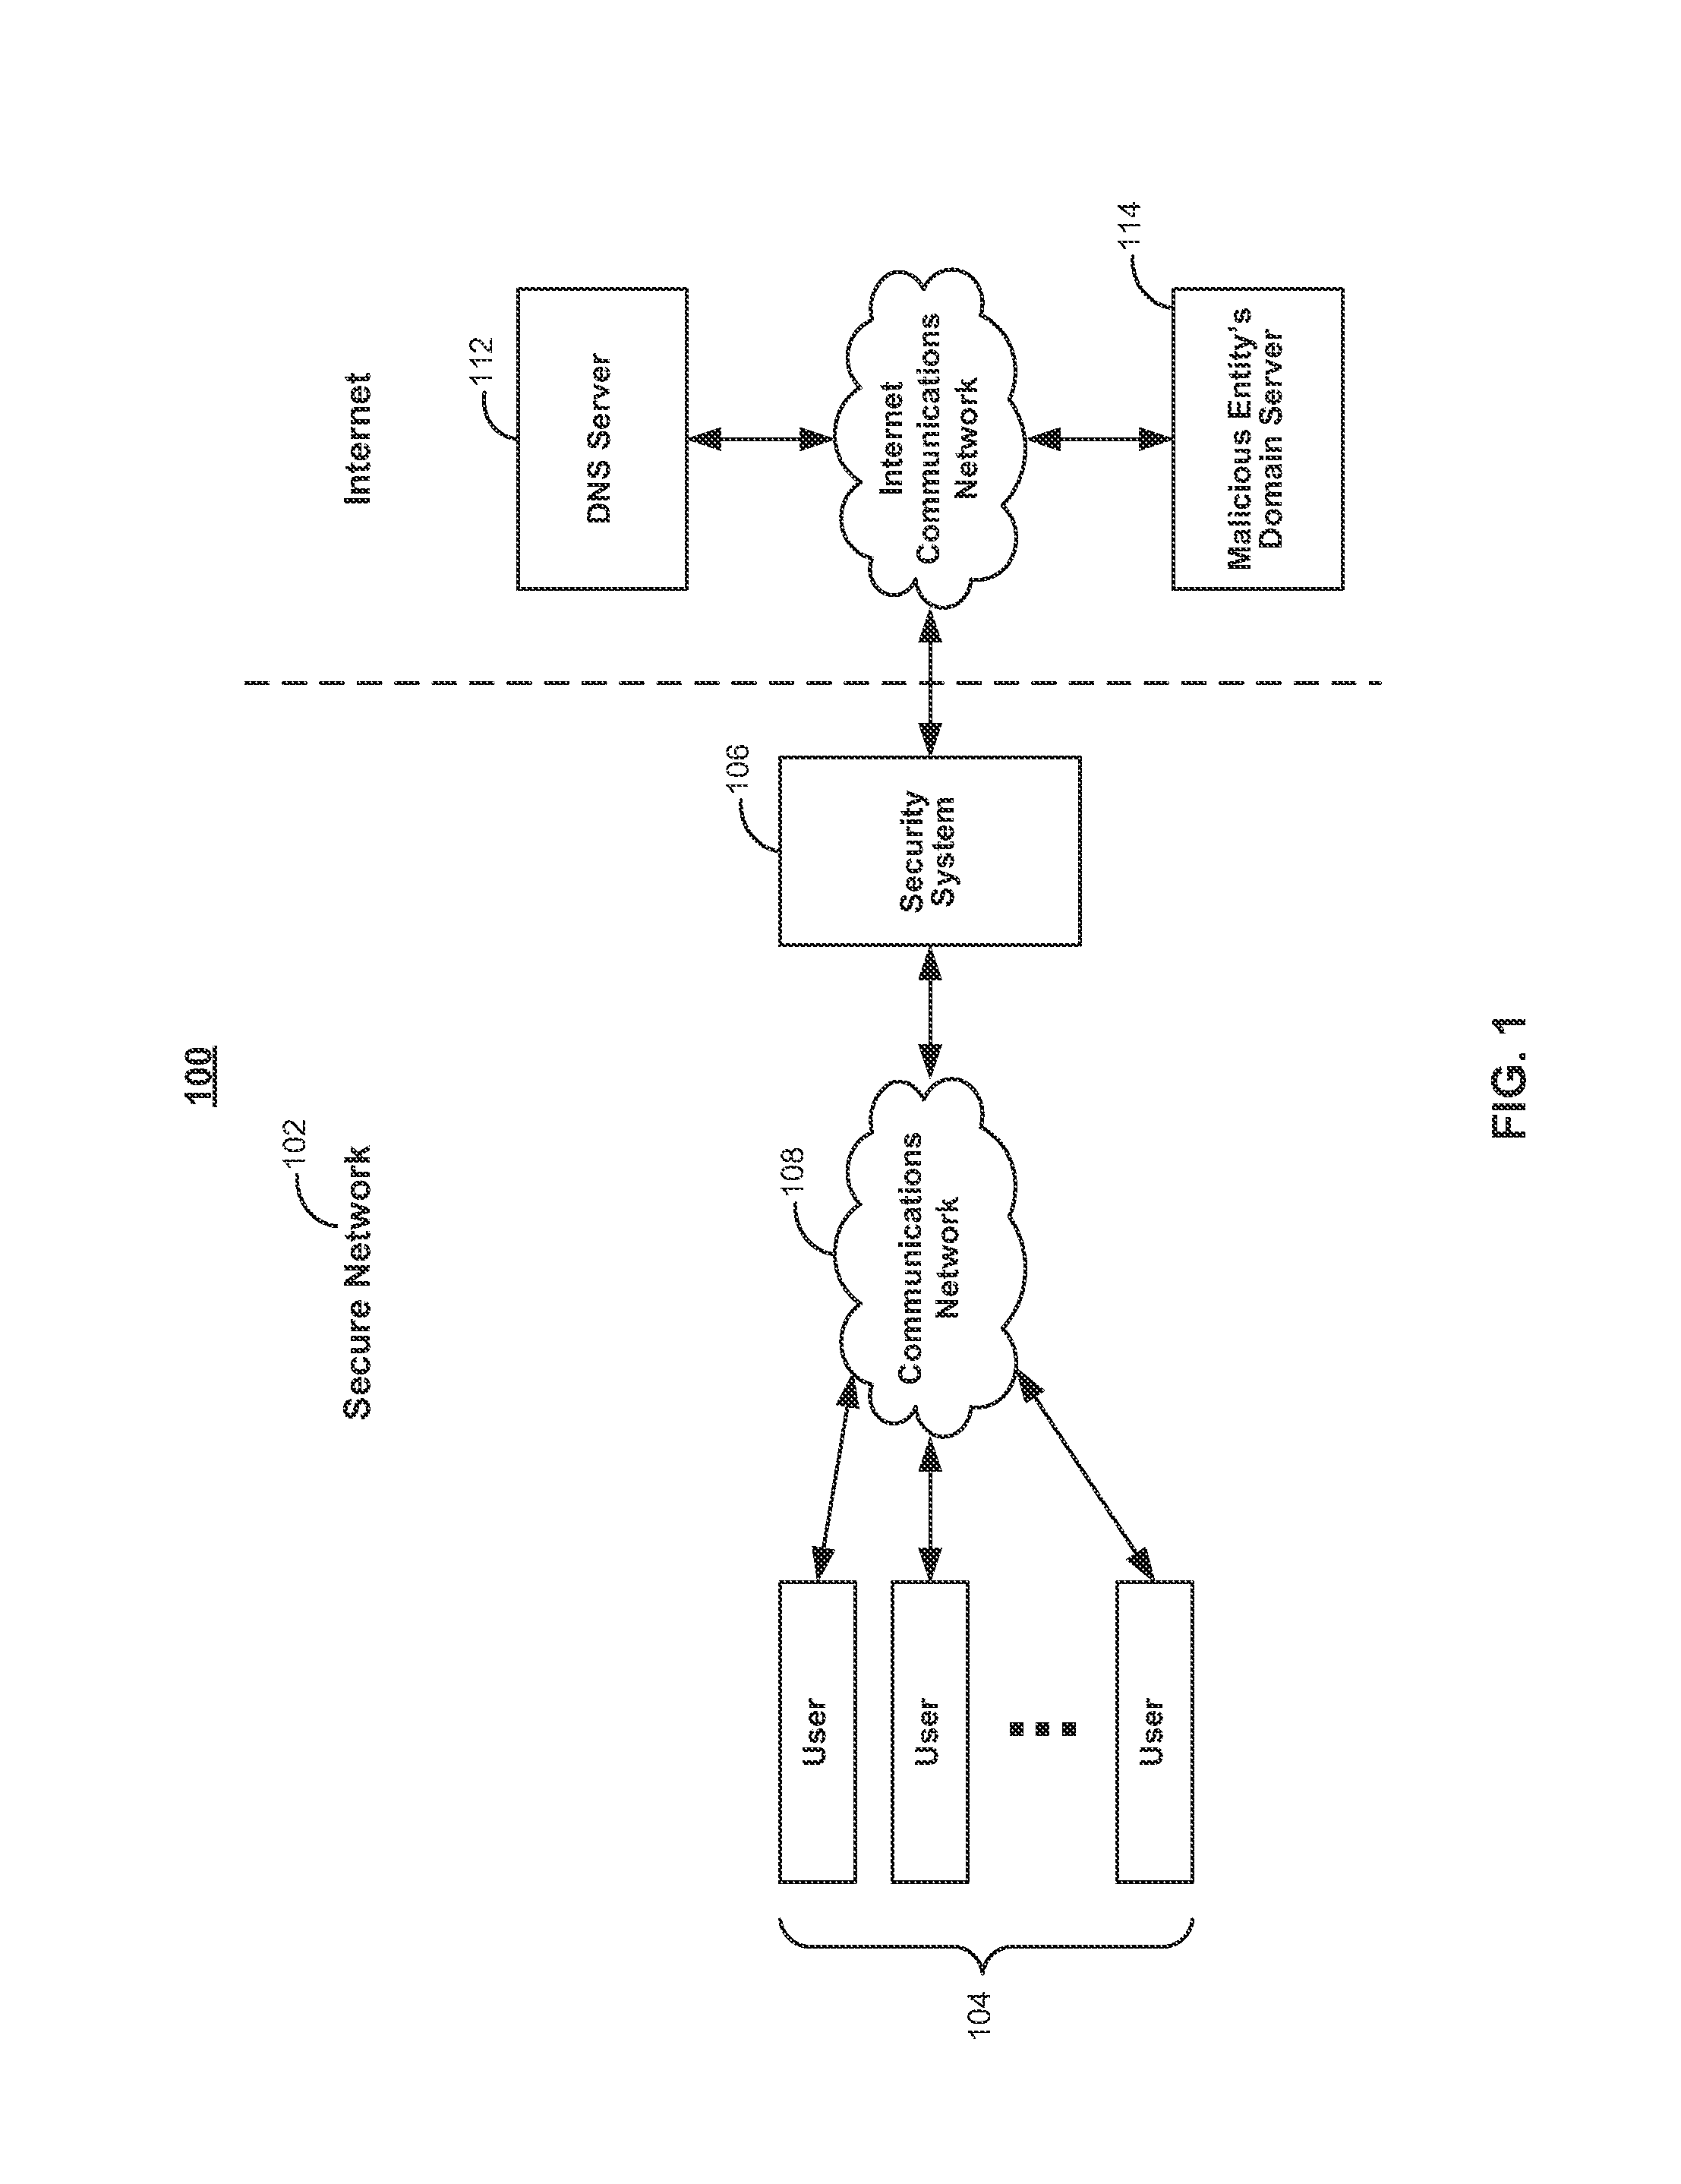 Systems and methods for detecting covert DNS tunnels